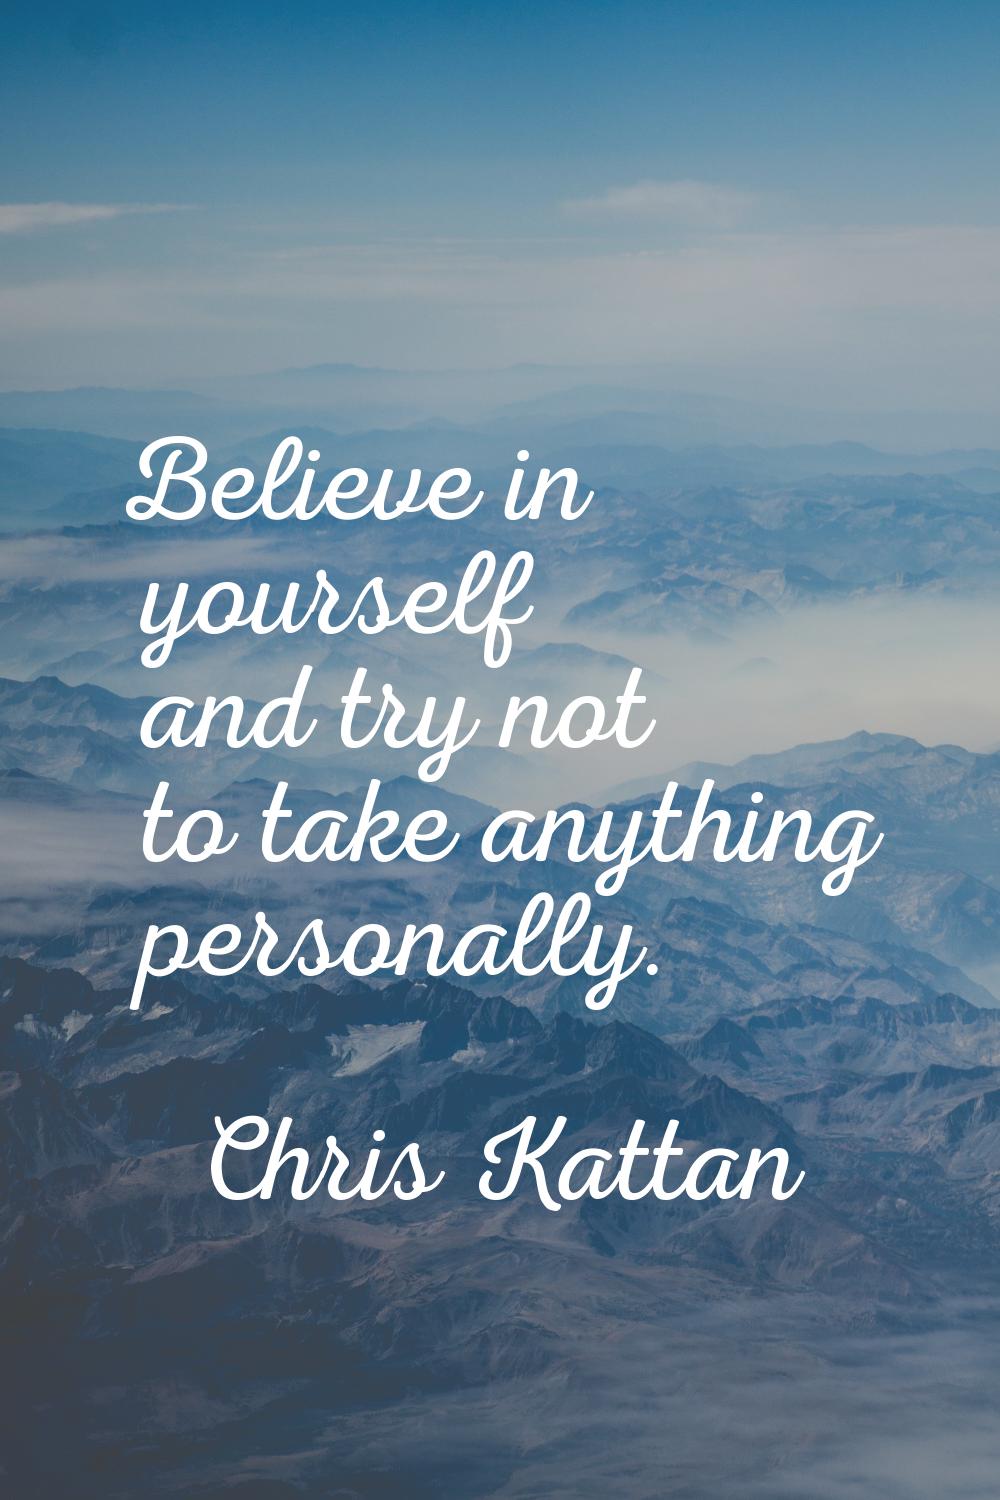 Believe in yourself and try not to take anything personally.